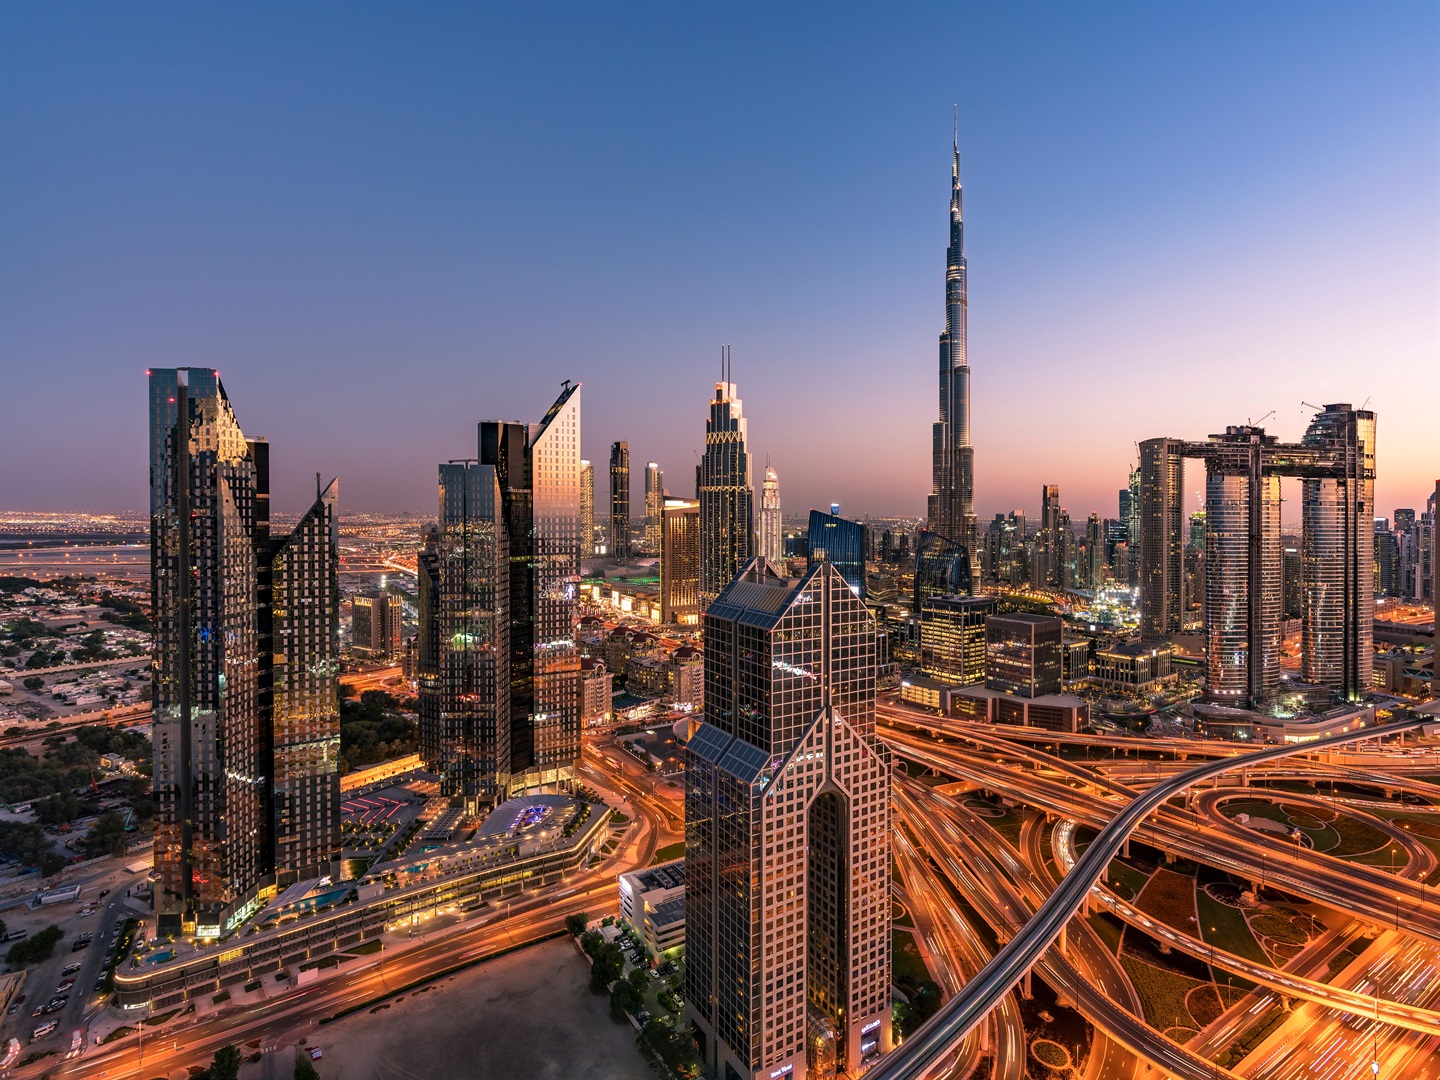 Dubai was ranked the most overworked city in the world. Owngarden/Getty Images